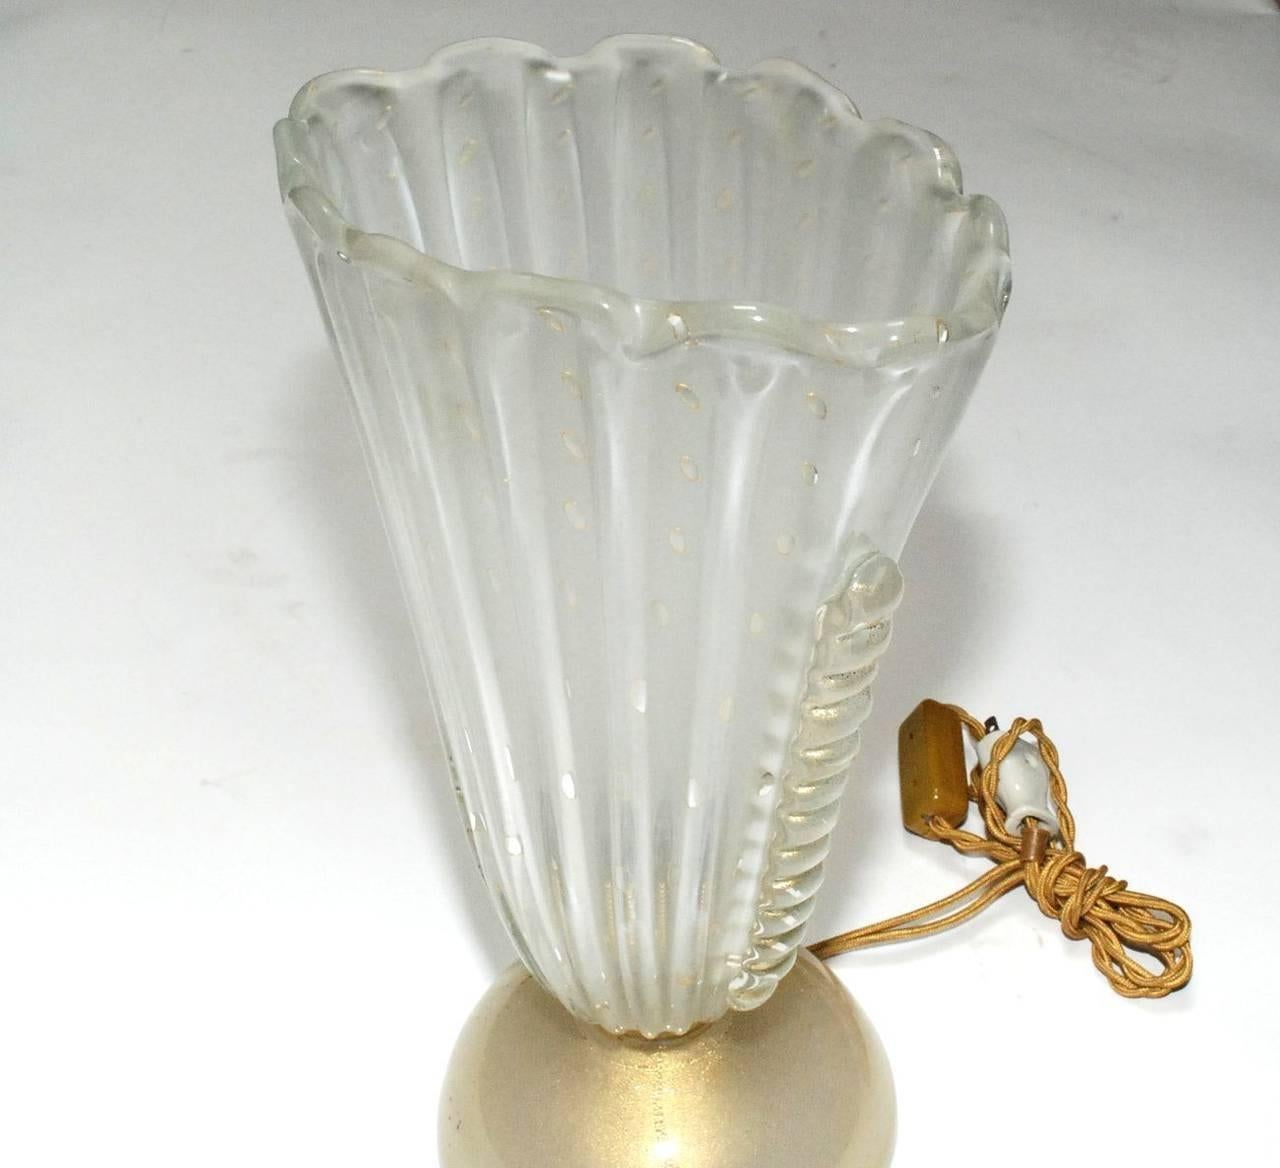 Vintage Italian Murano glass table lamp with frosted shade in bollicine technique, mounted on a gold infused Murano glass base / Made in Italy circa 1960’s 
1 light / E26 or E27 type / max 60W  
Height: 15 inches / Width: 9 inches / Depth: 6.5